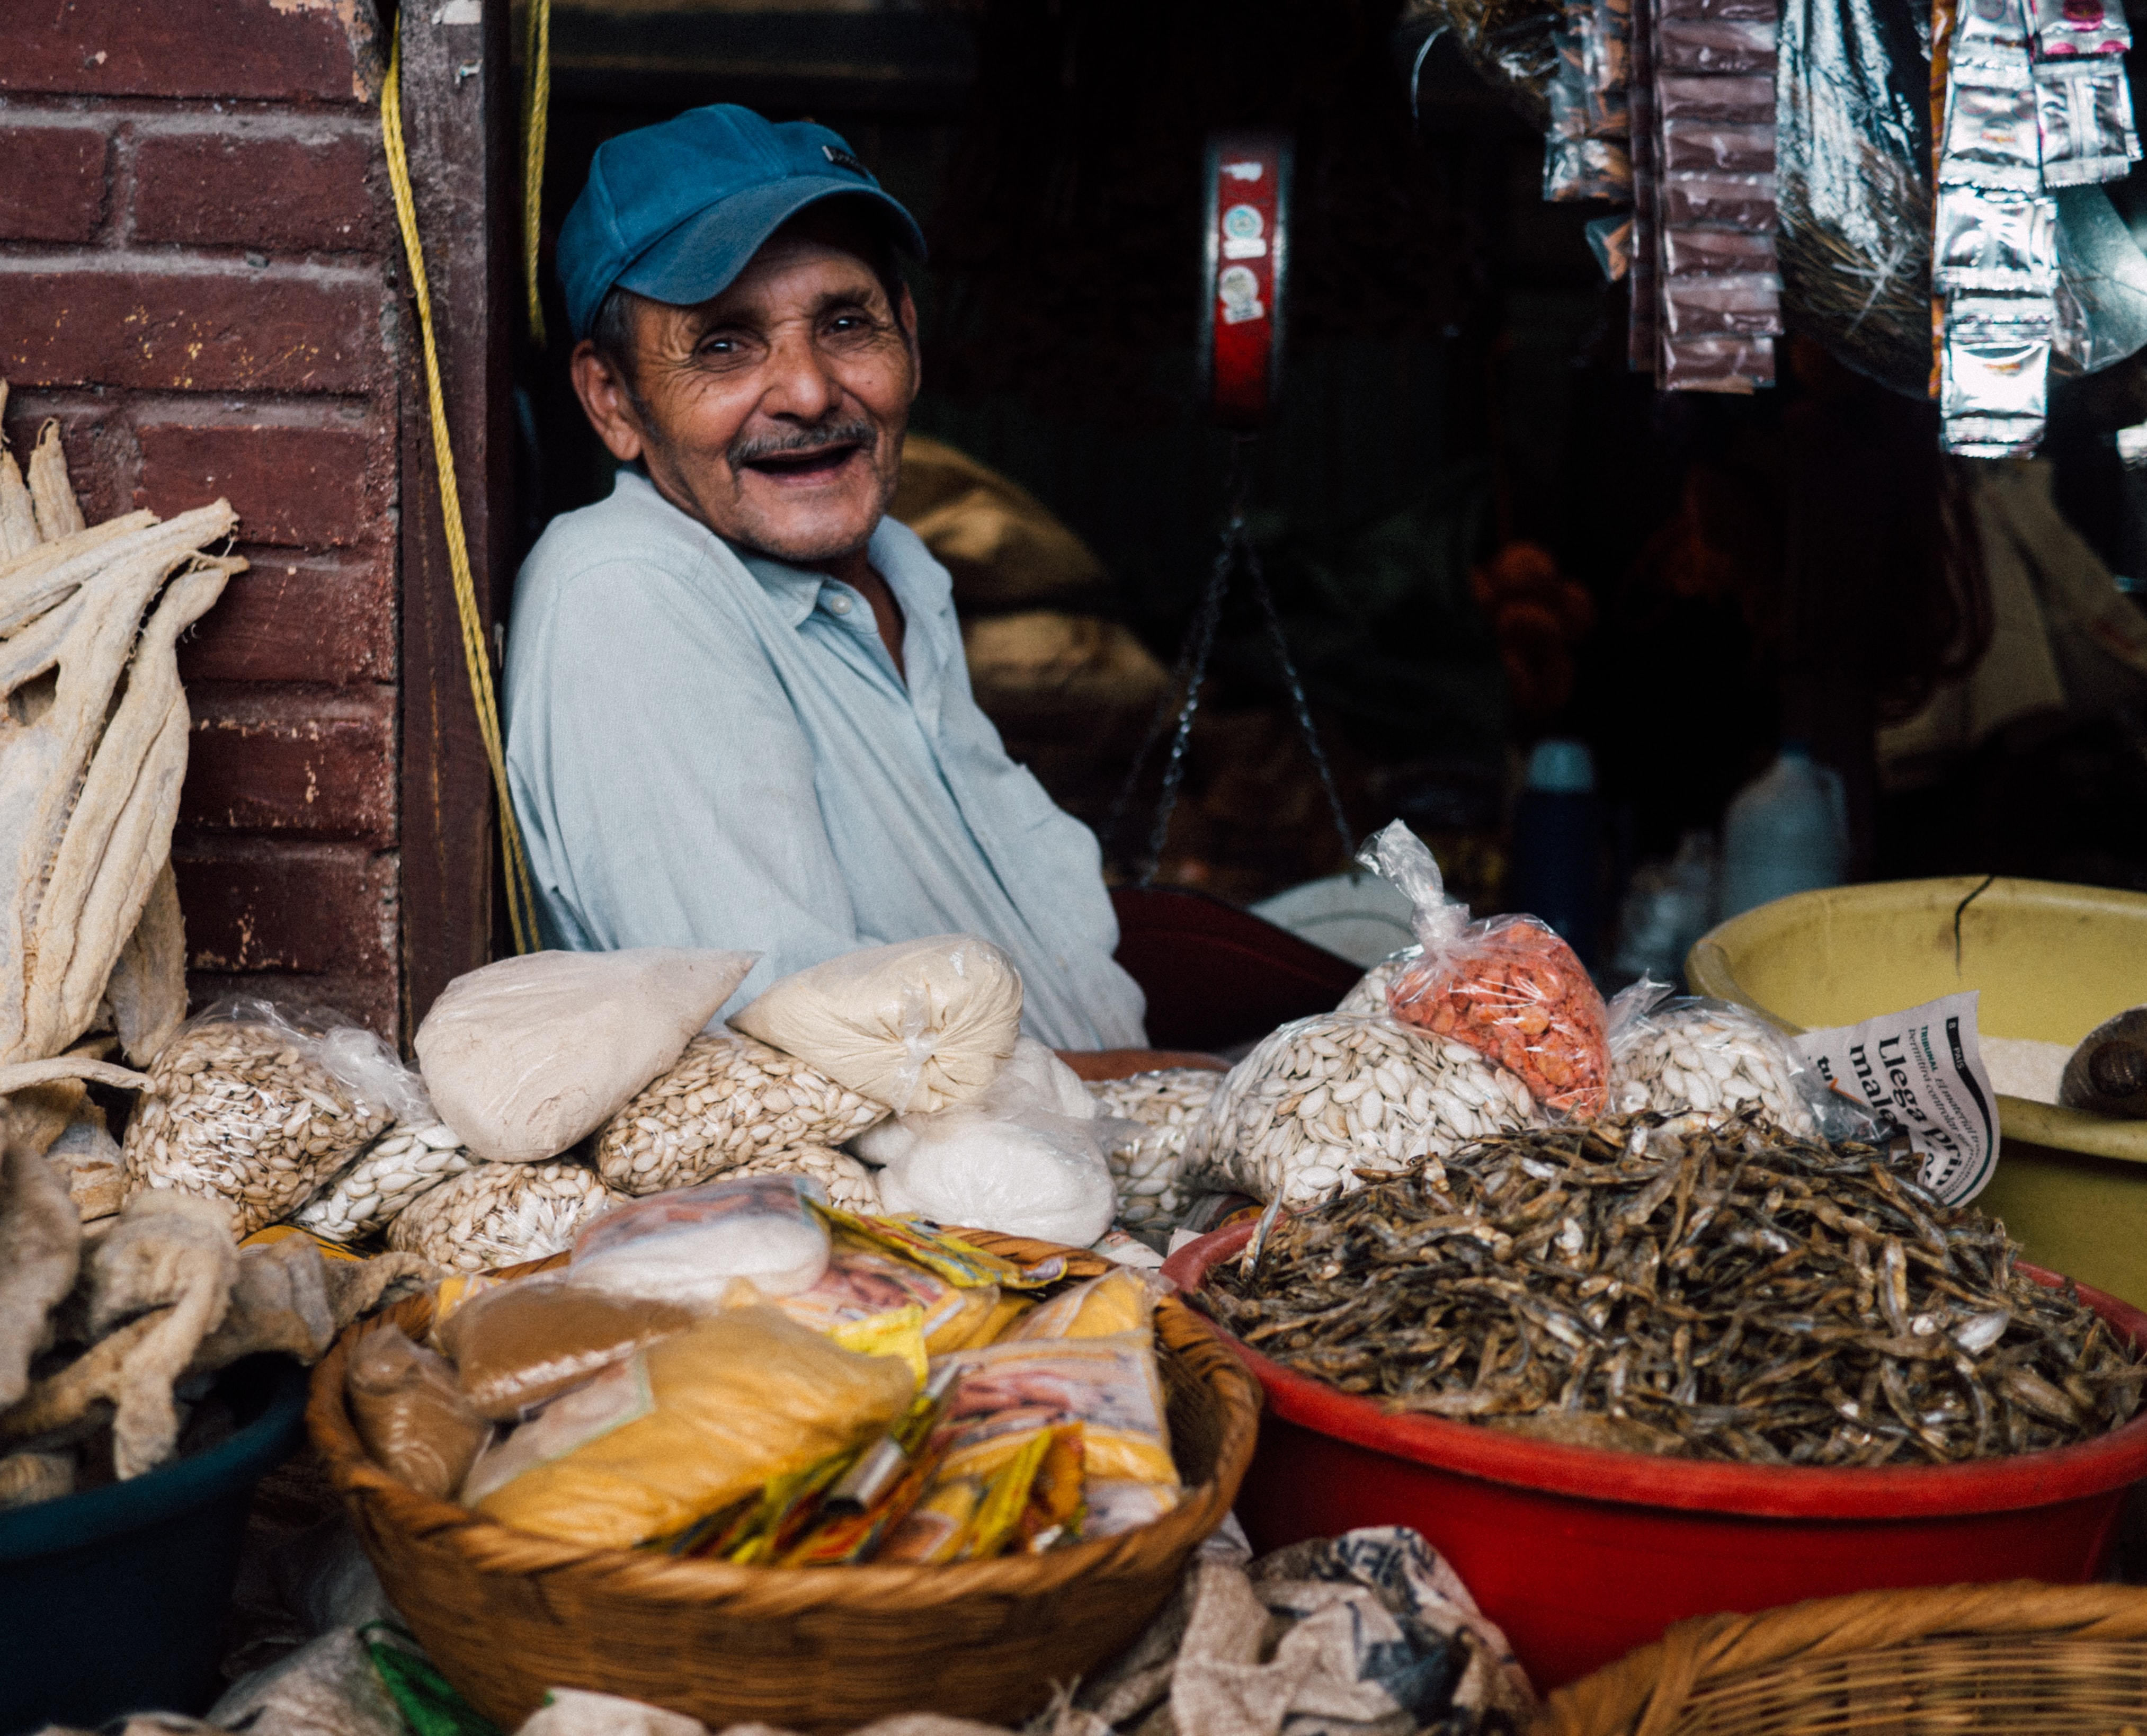 photo of man in his 50's or 60's surrounded by bowls of grains and food supplies in a Honduran market